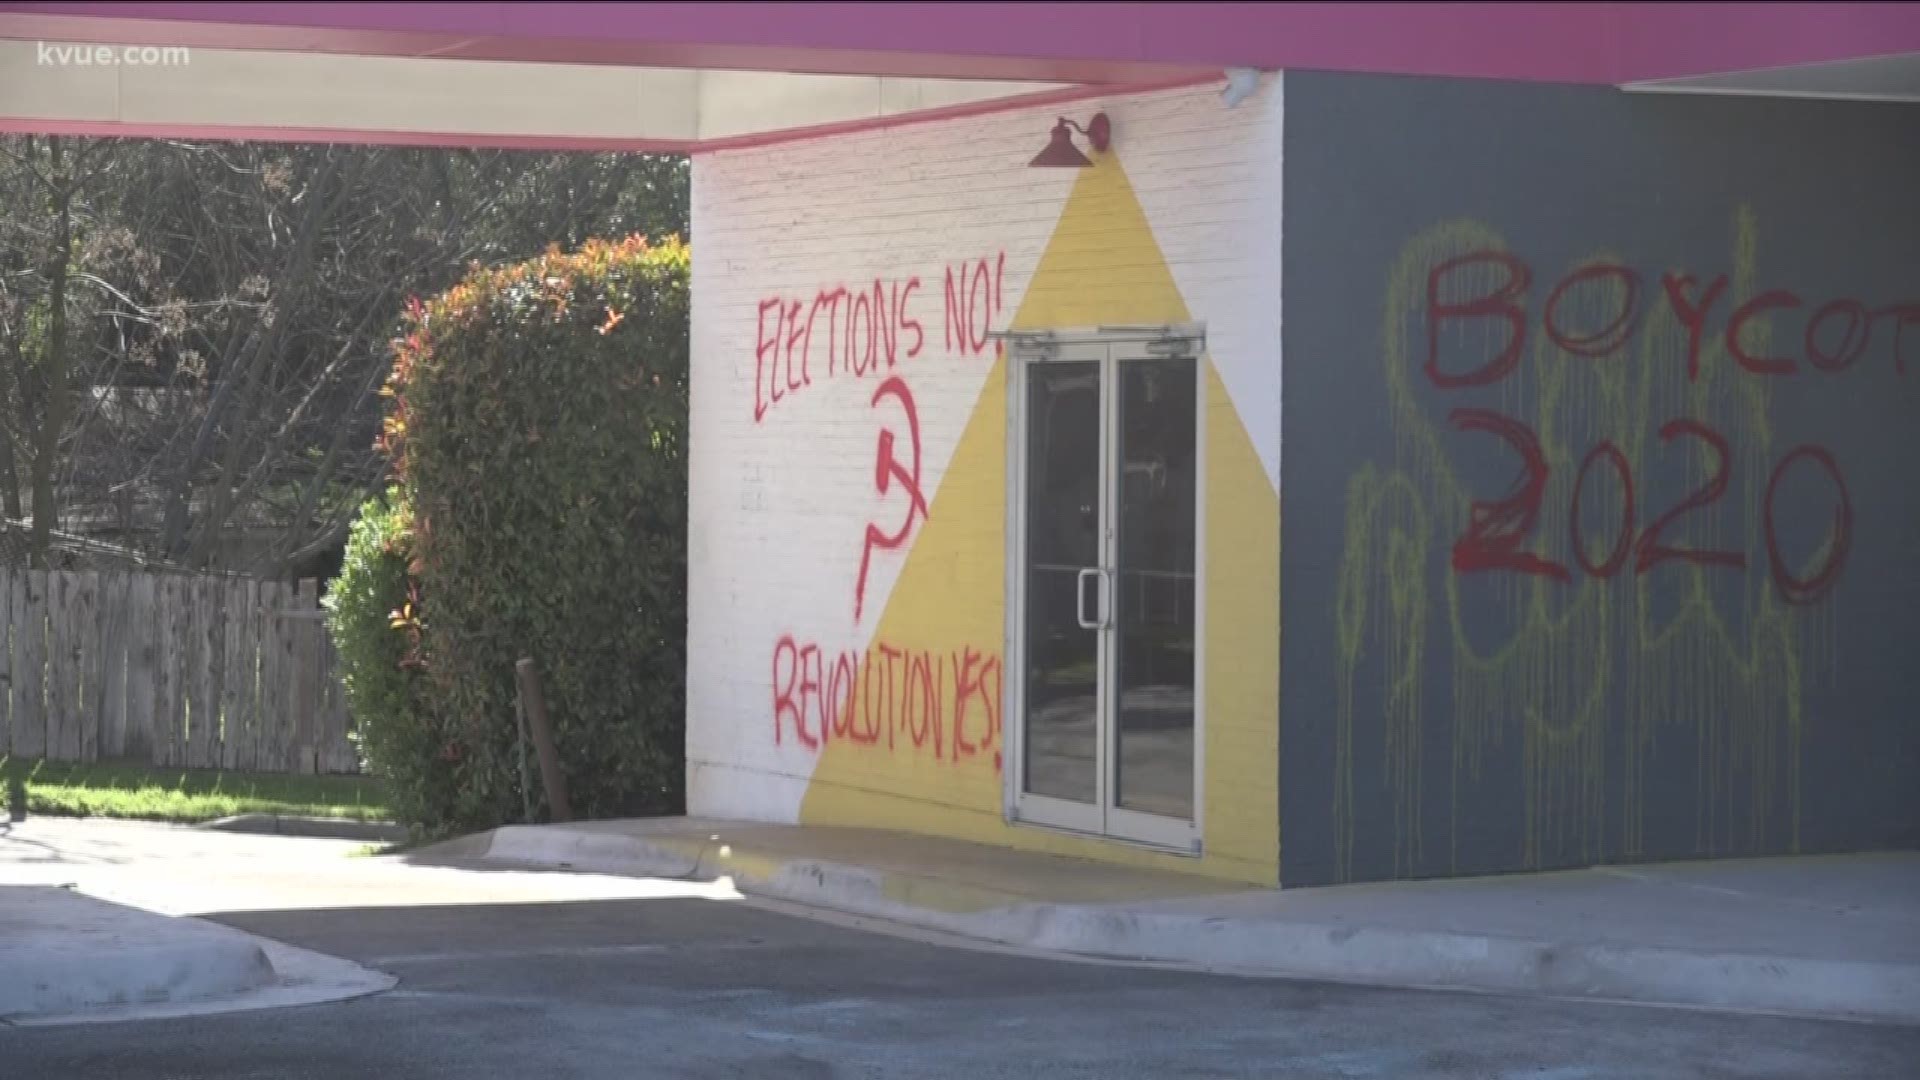 Presidential candidate Mike Bloomberg's Austin campaign office was the target of vandalism Thursday morning.